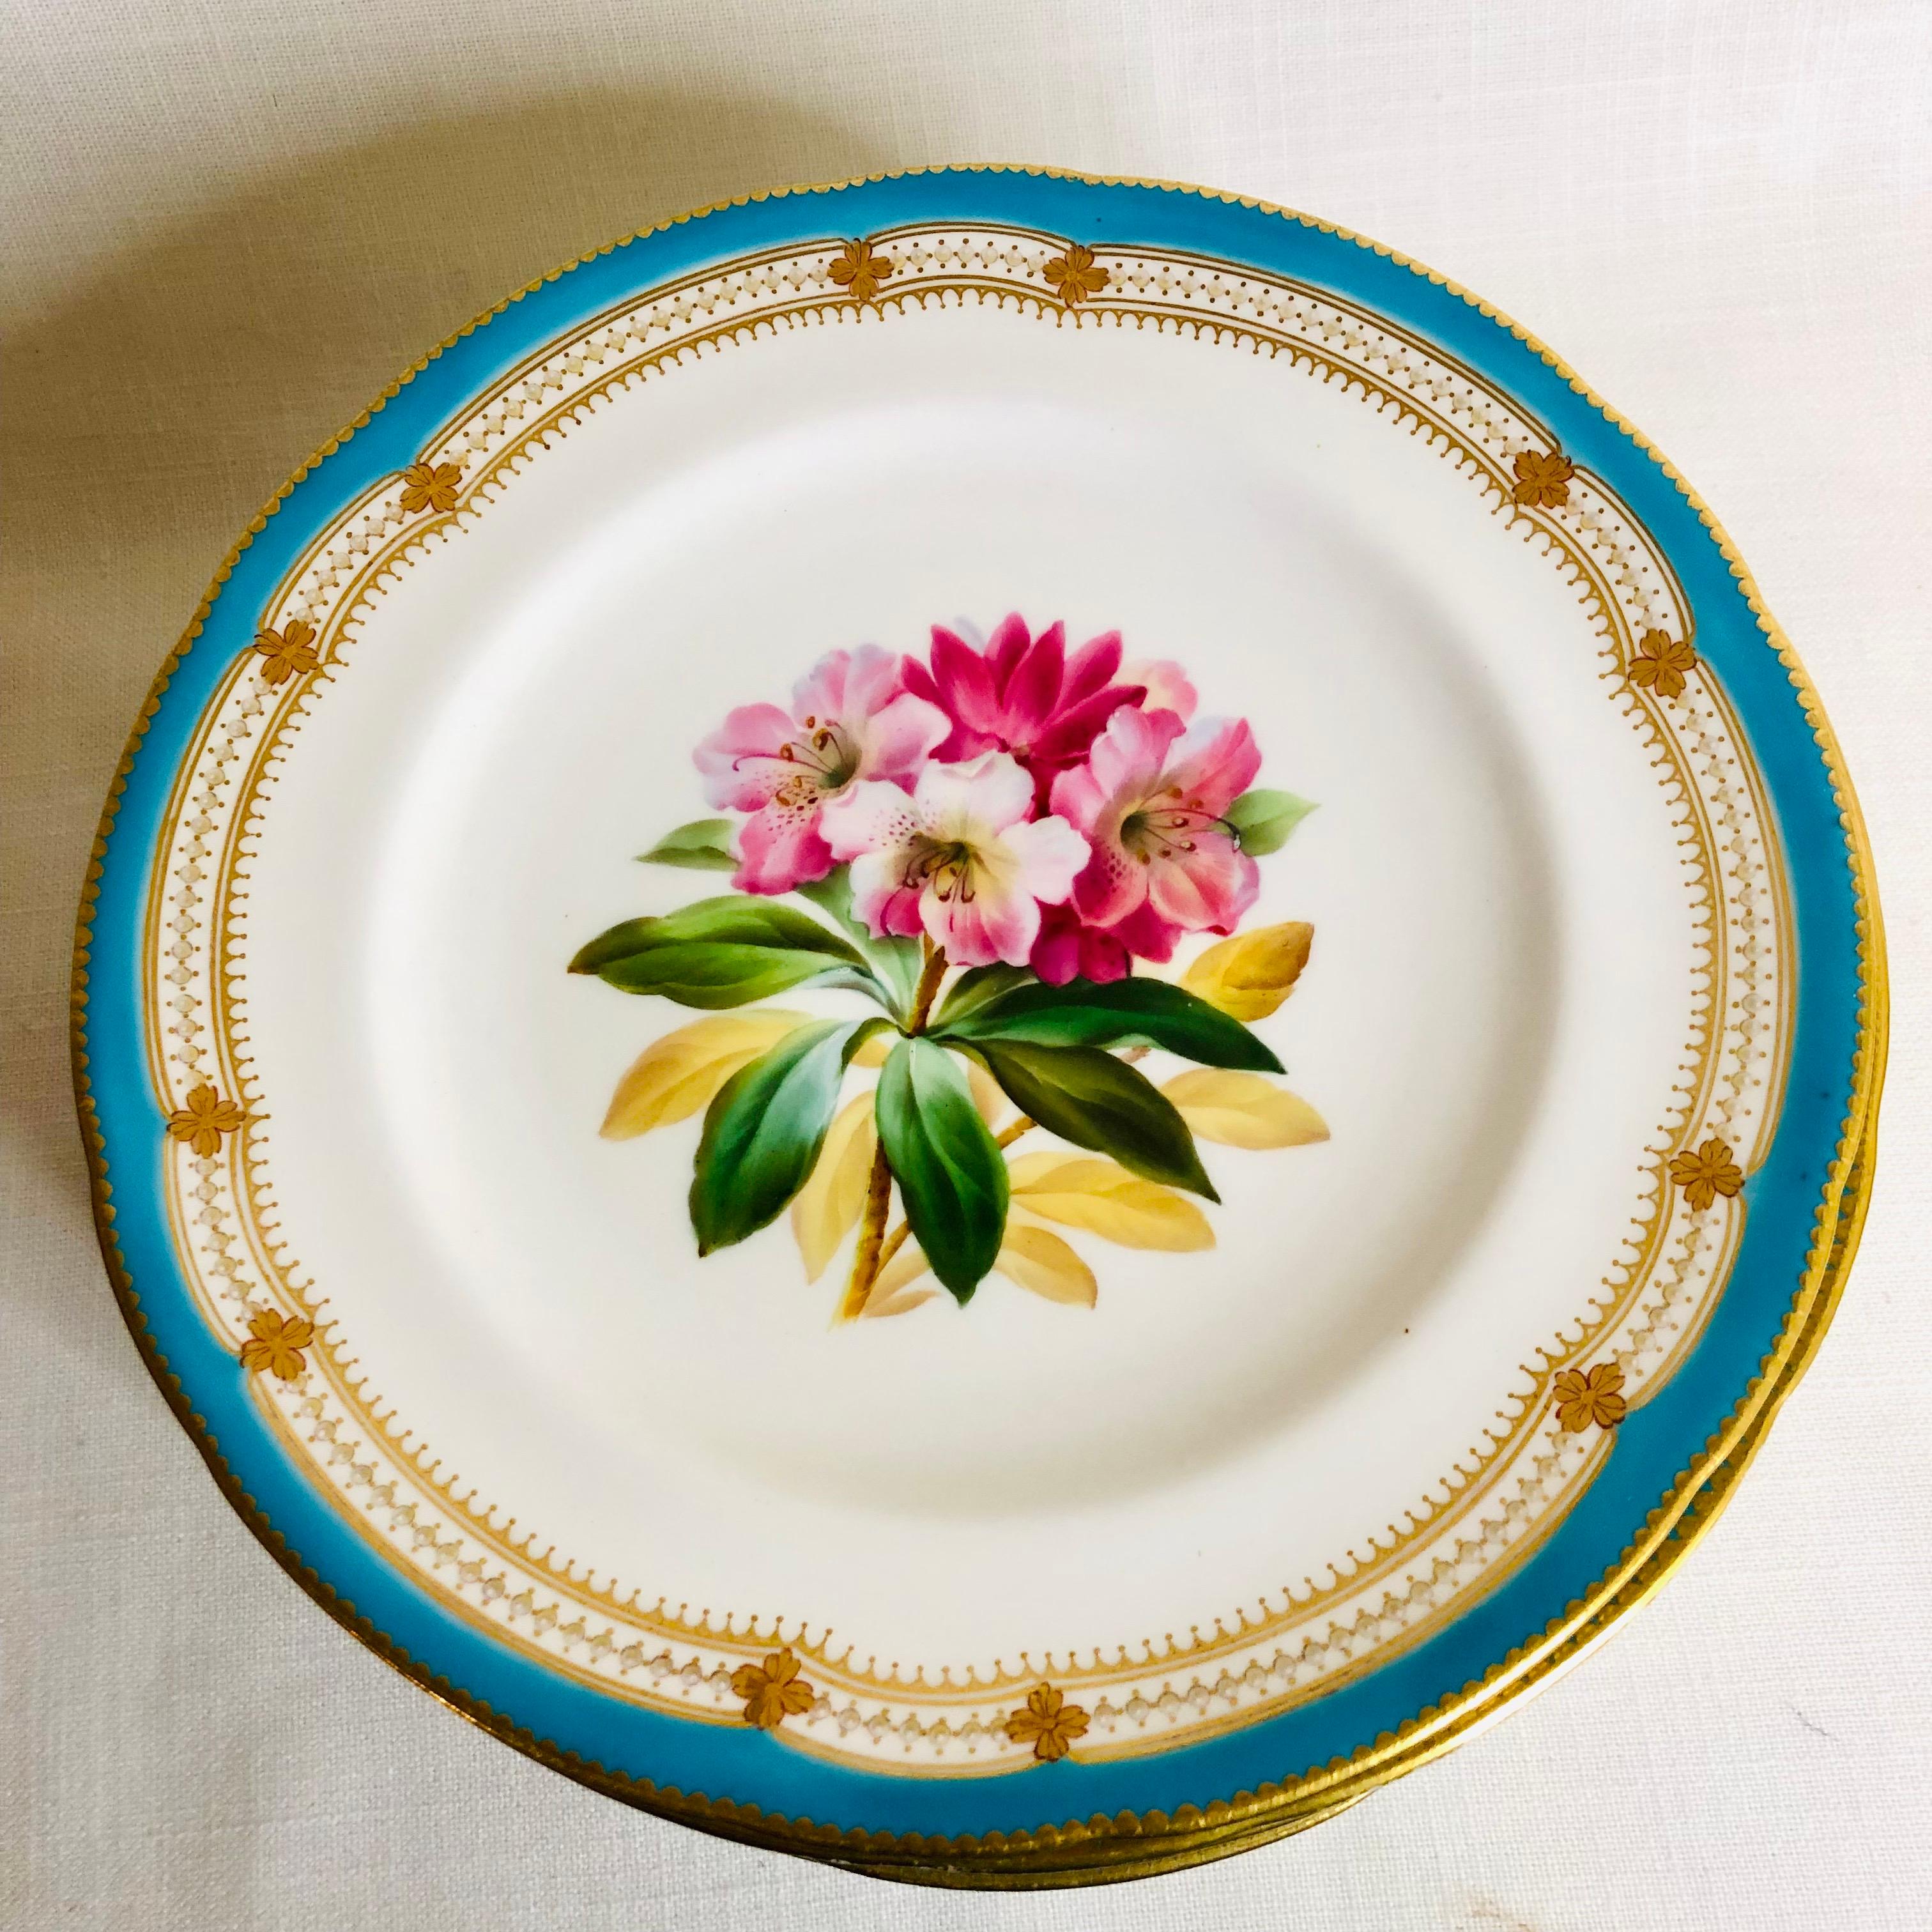 Set of 16 Rare Minton Plates Each Hand-Painted with a Different Flower Bouquet 1